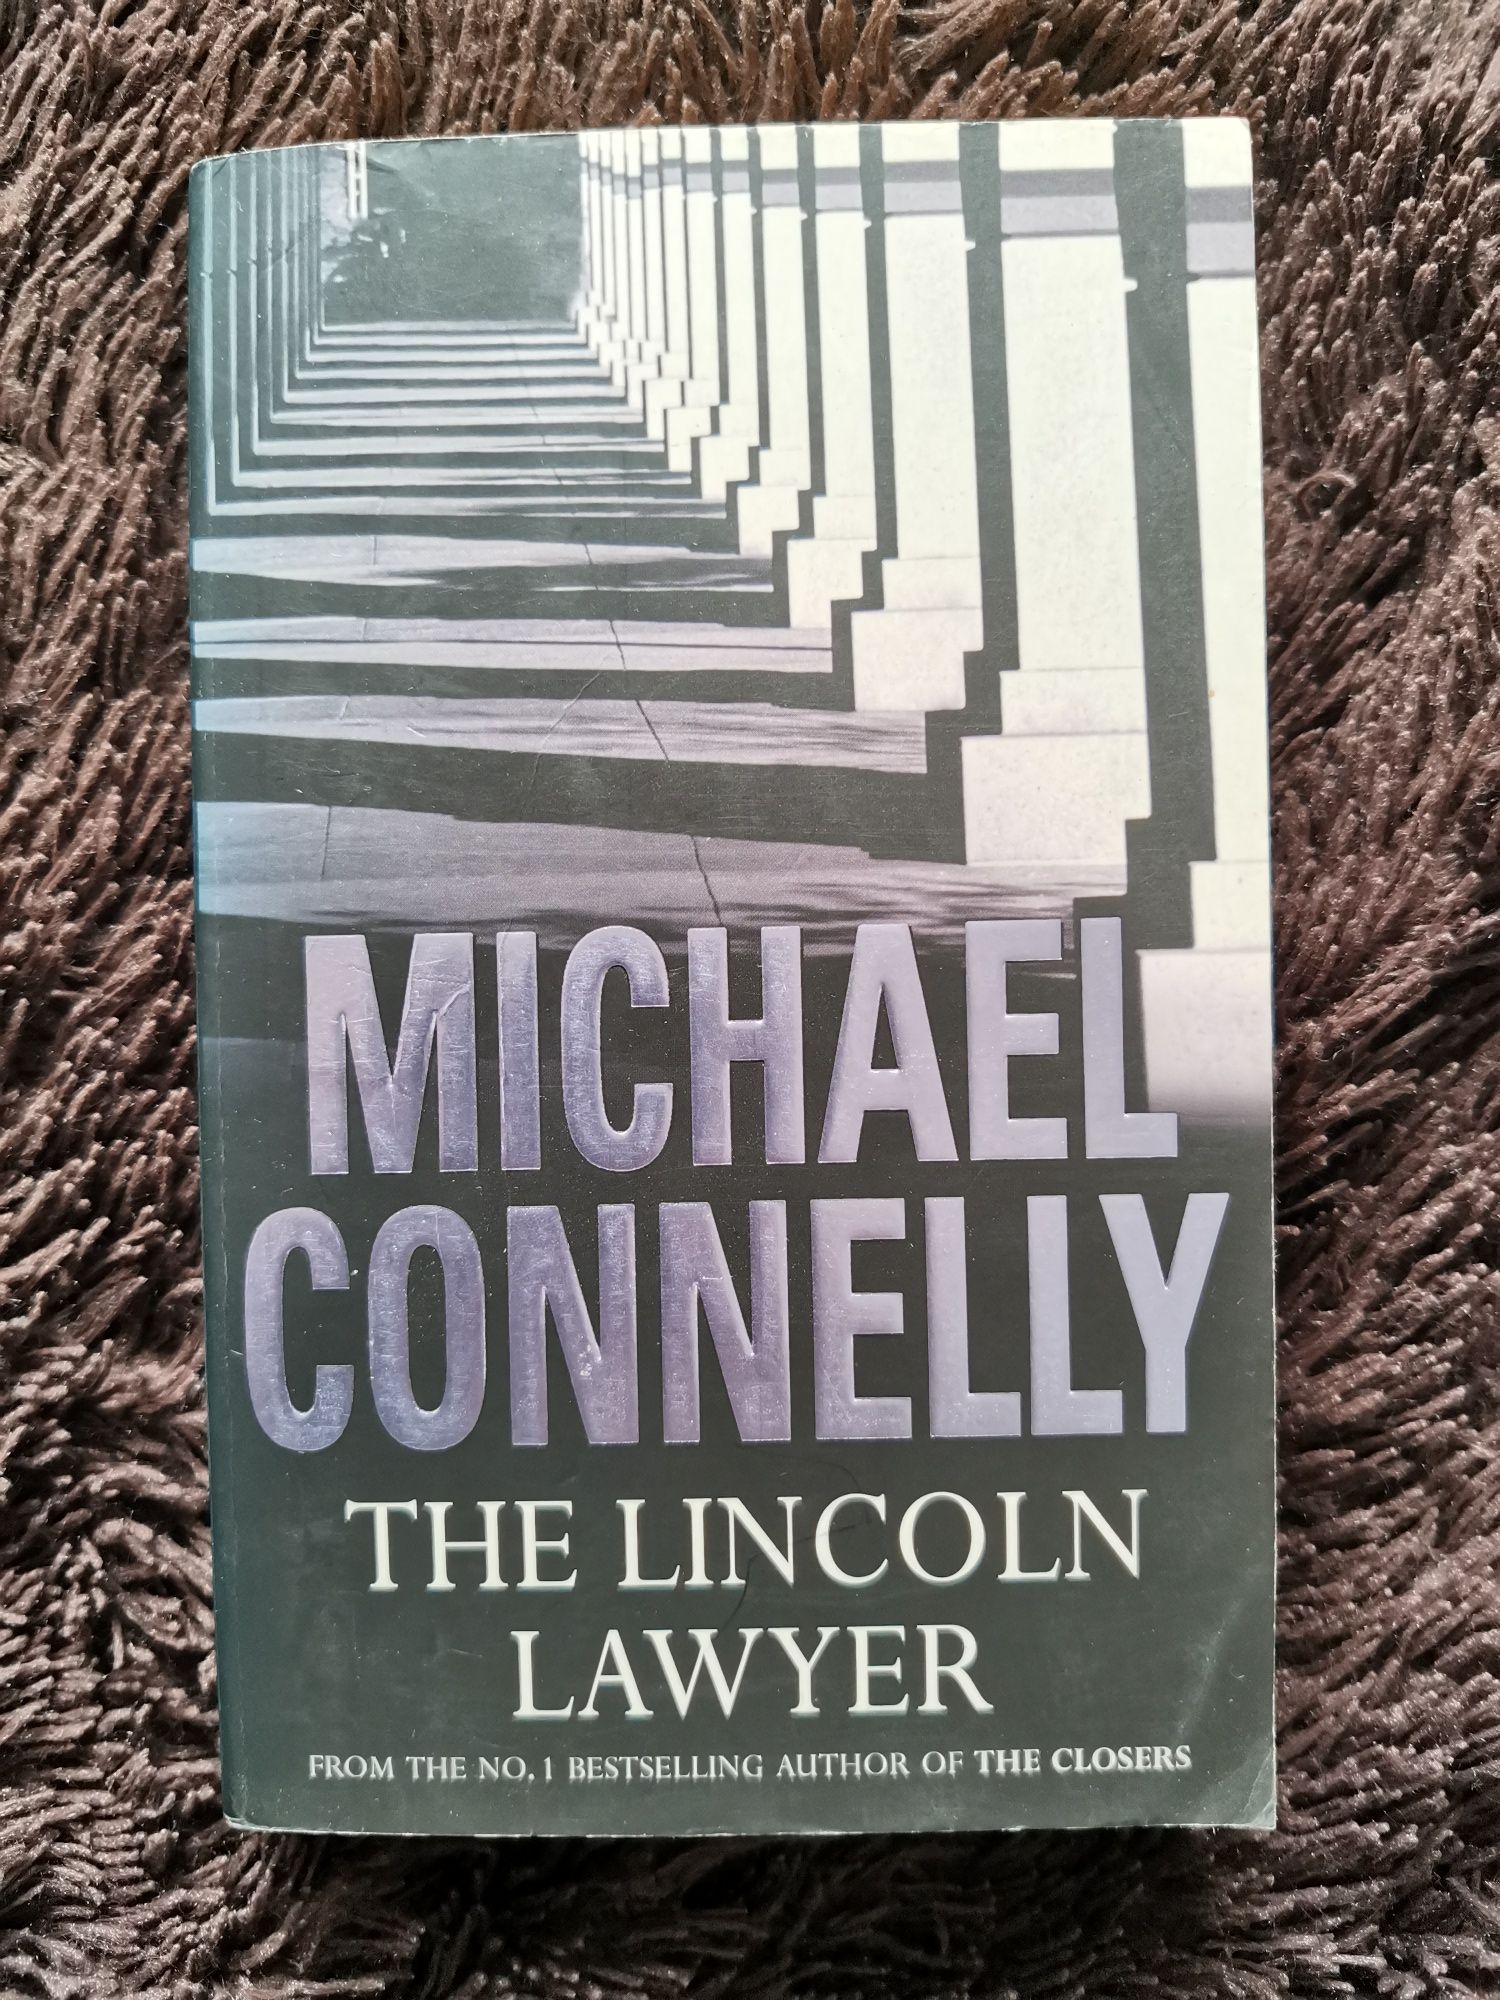 The Lincoln lawyer, Michael Connelly